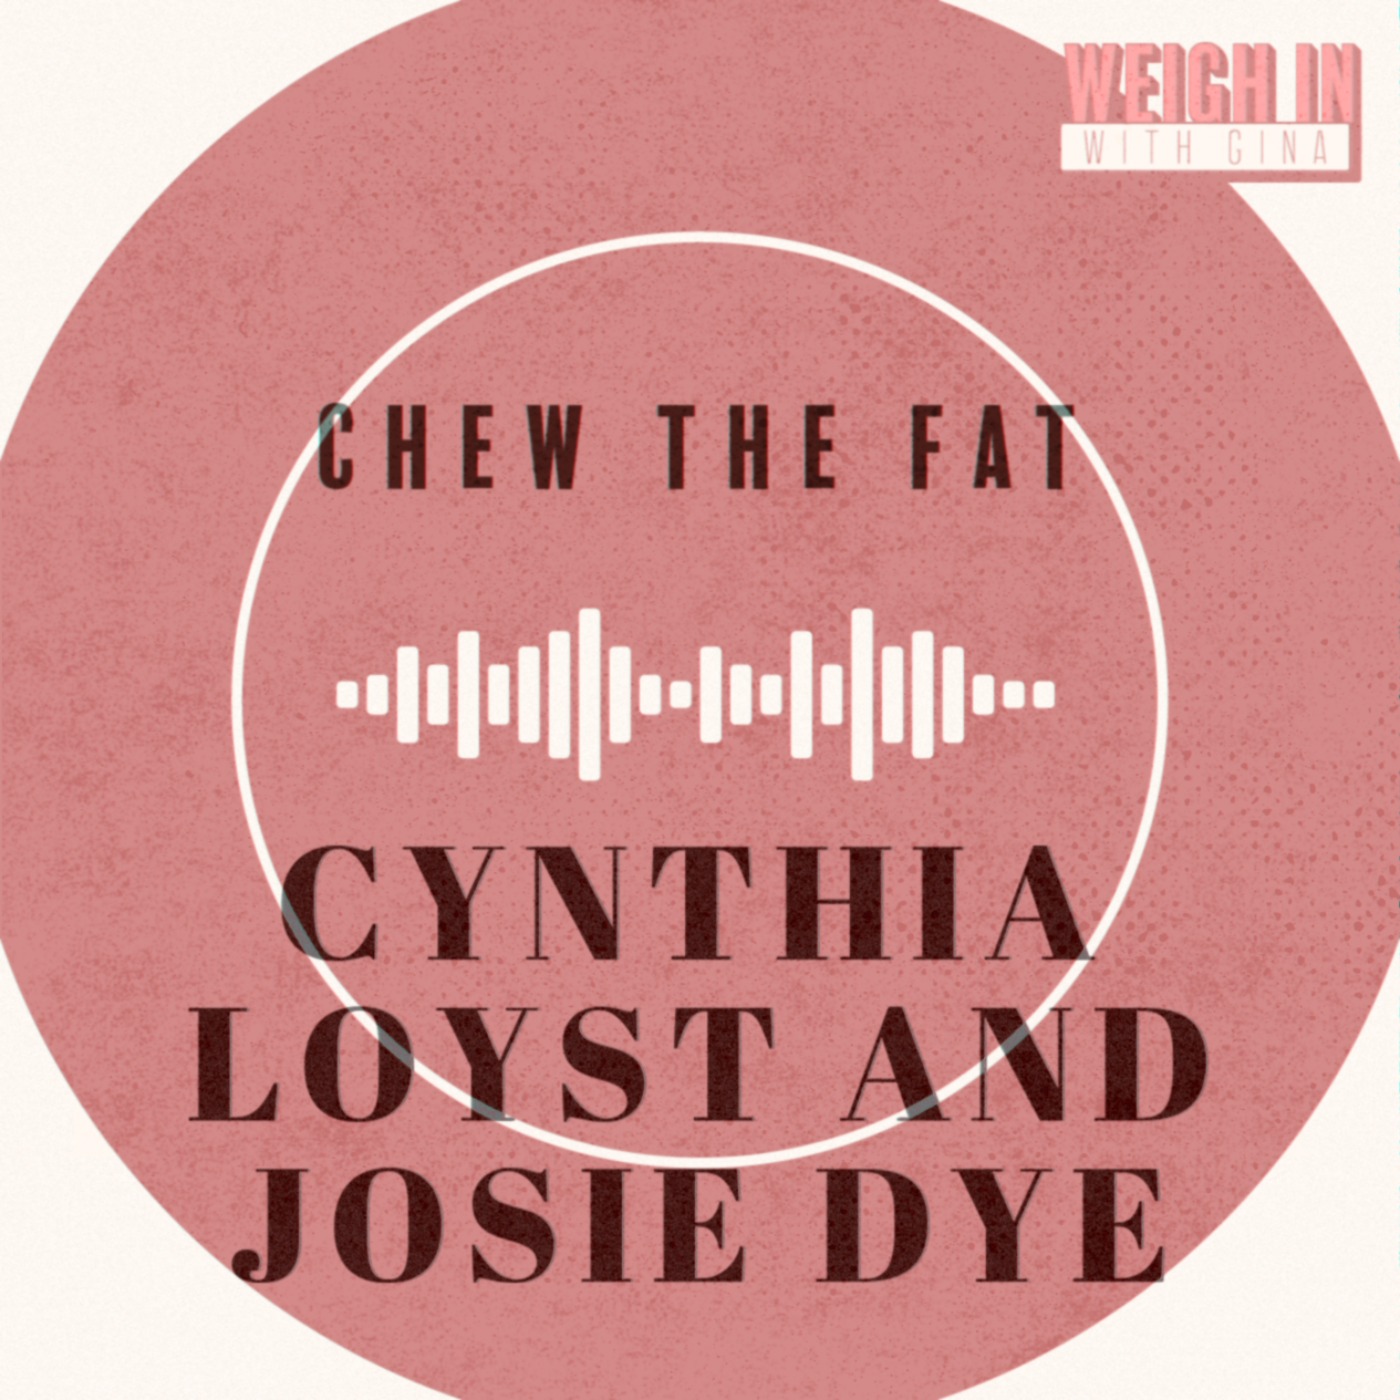 Chew the Fat with Cynthia Loyst and Josie Dye